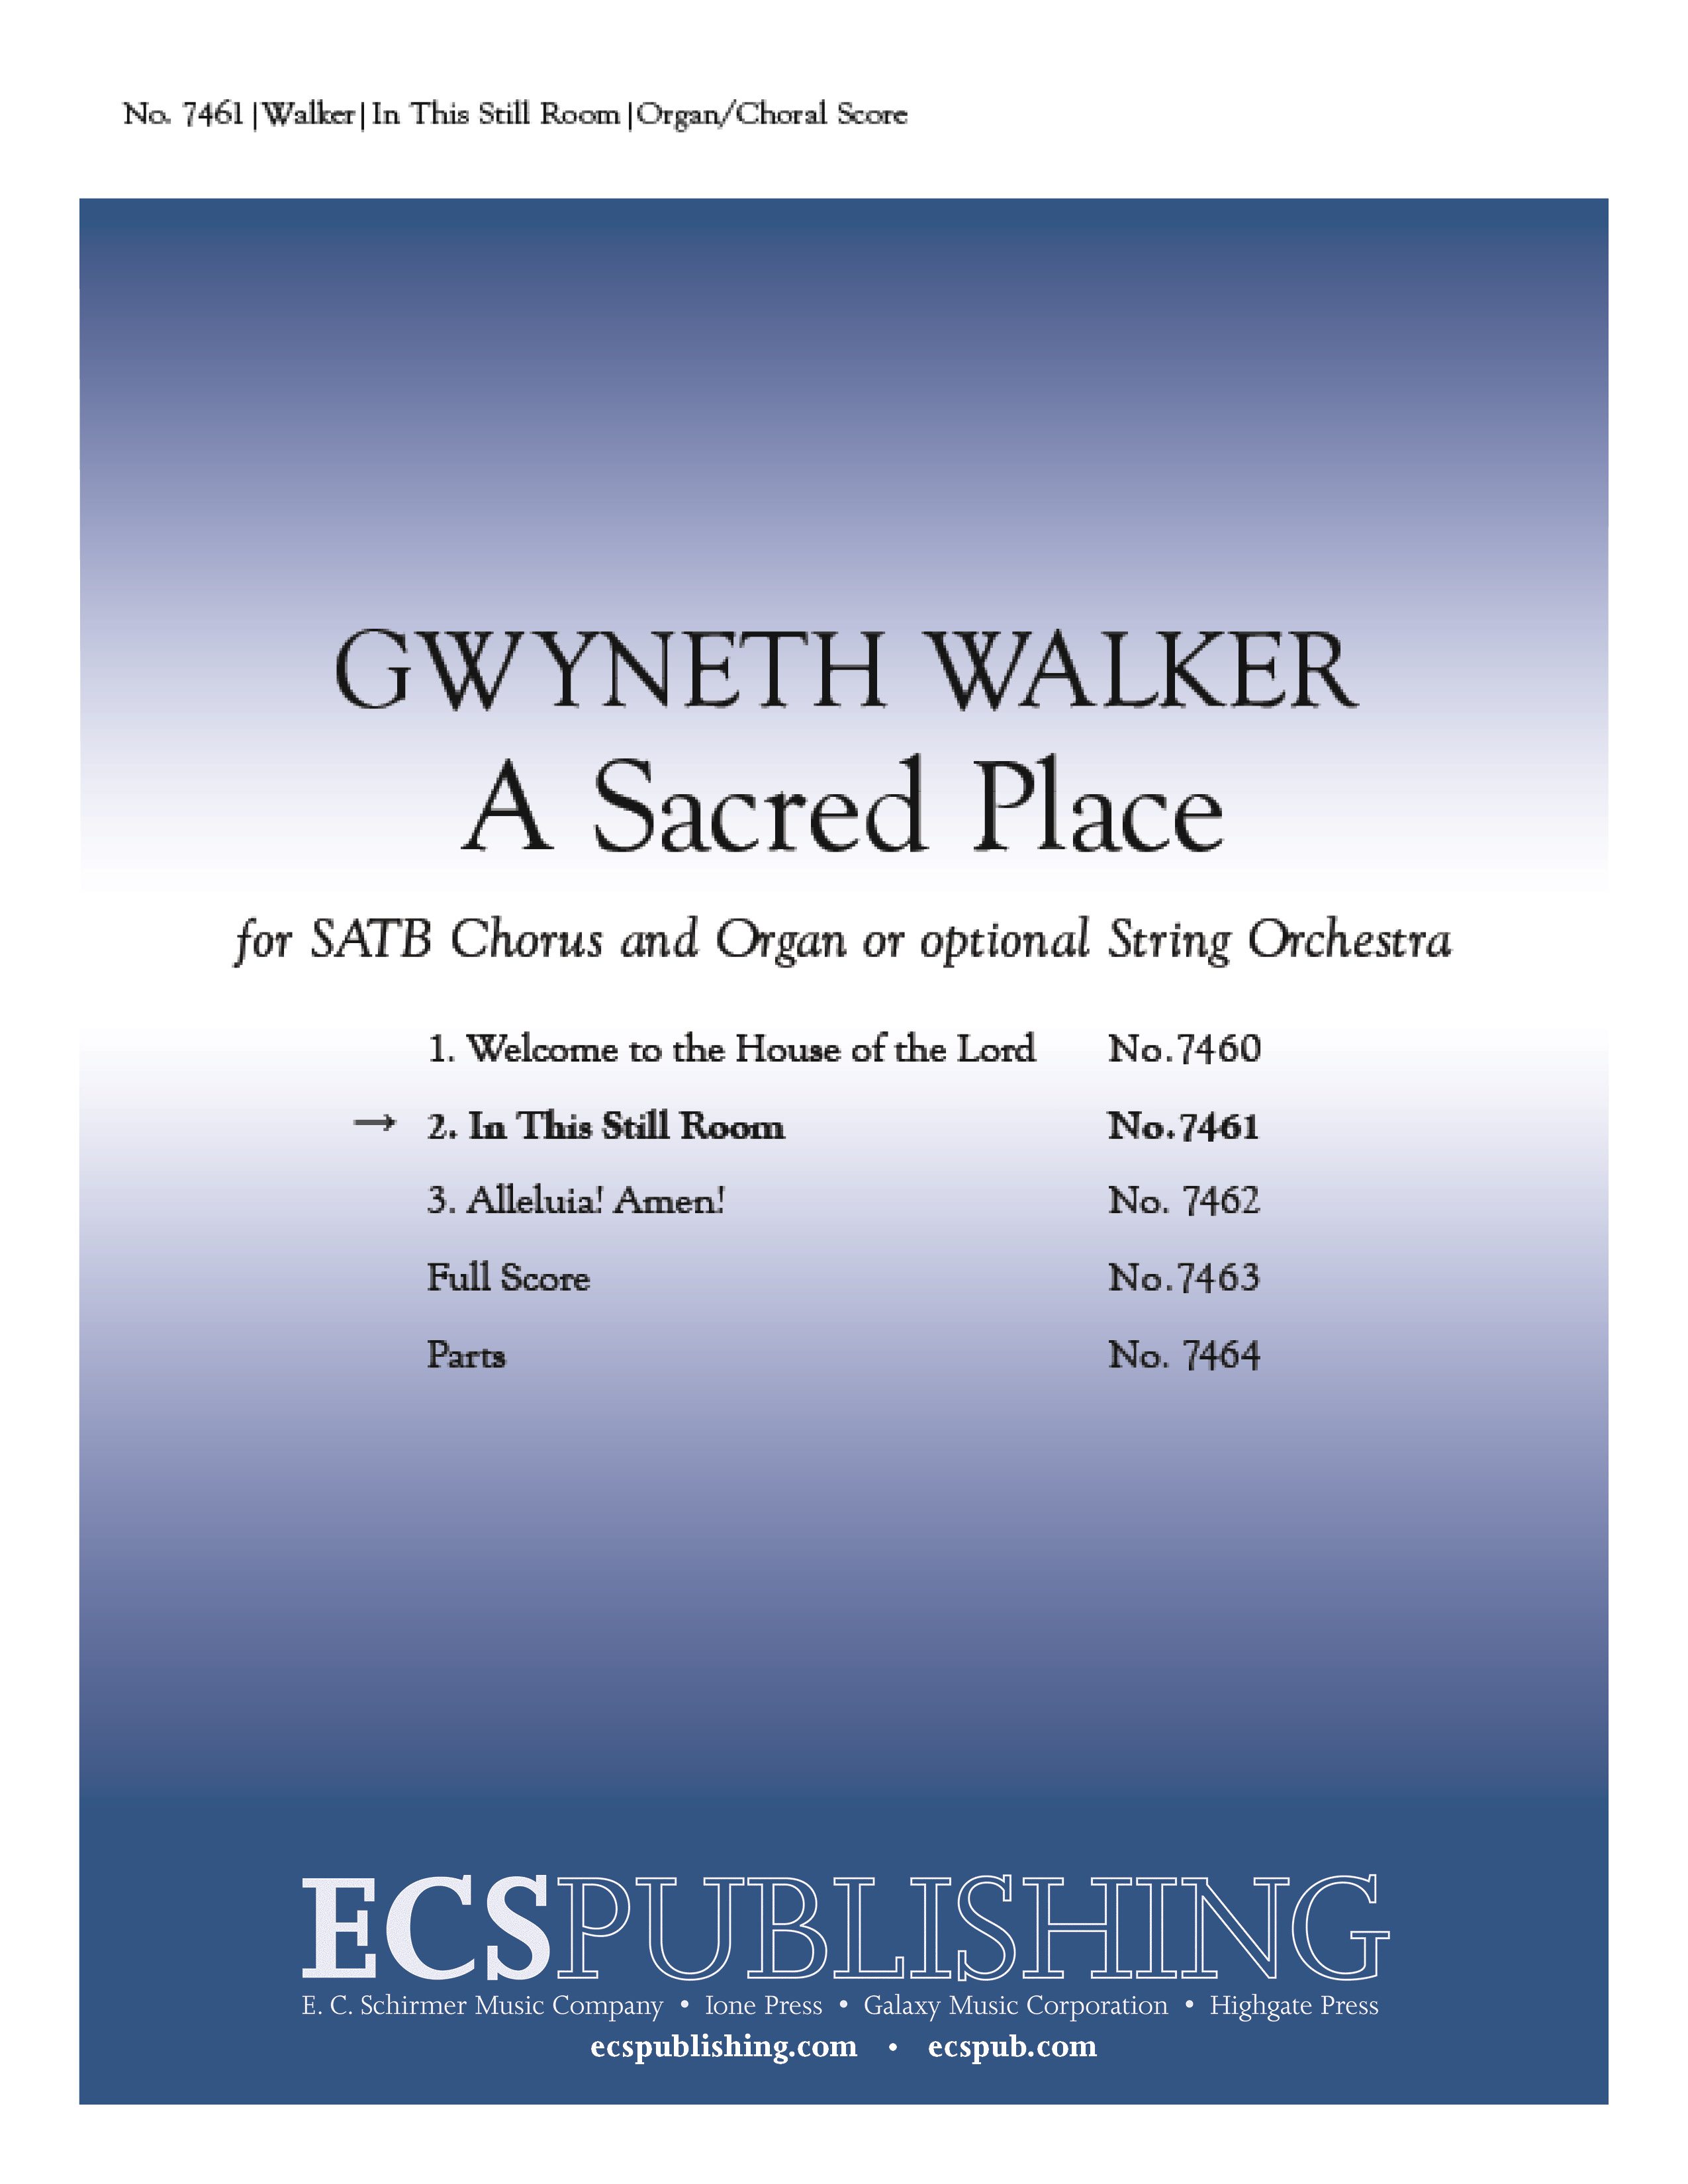 A Sacred Place: 2. In This Still Room : SATB : Gwyneth Walker : Sheet Music : 7461